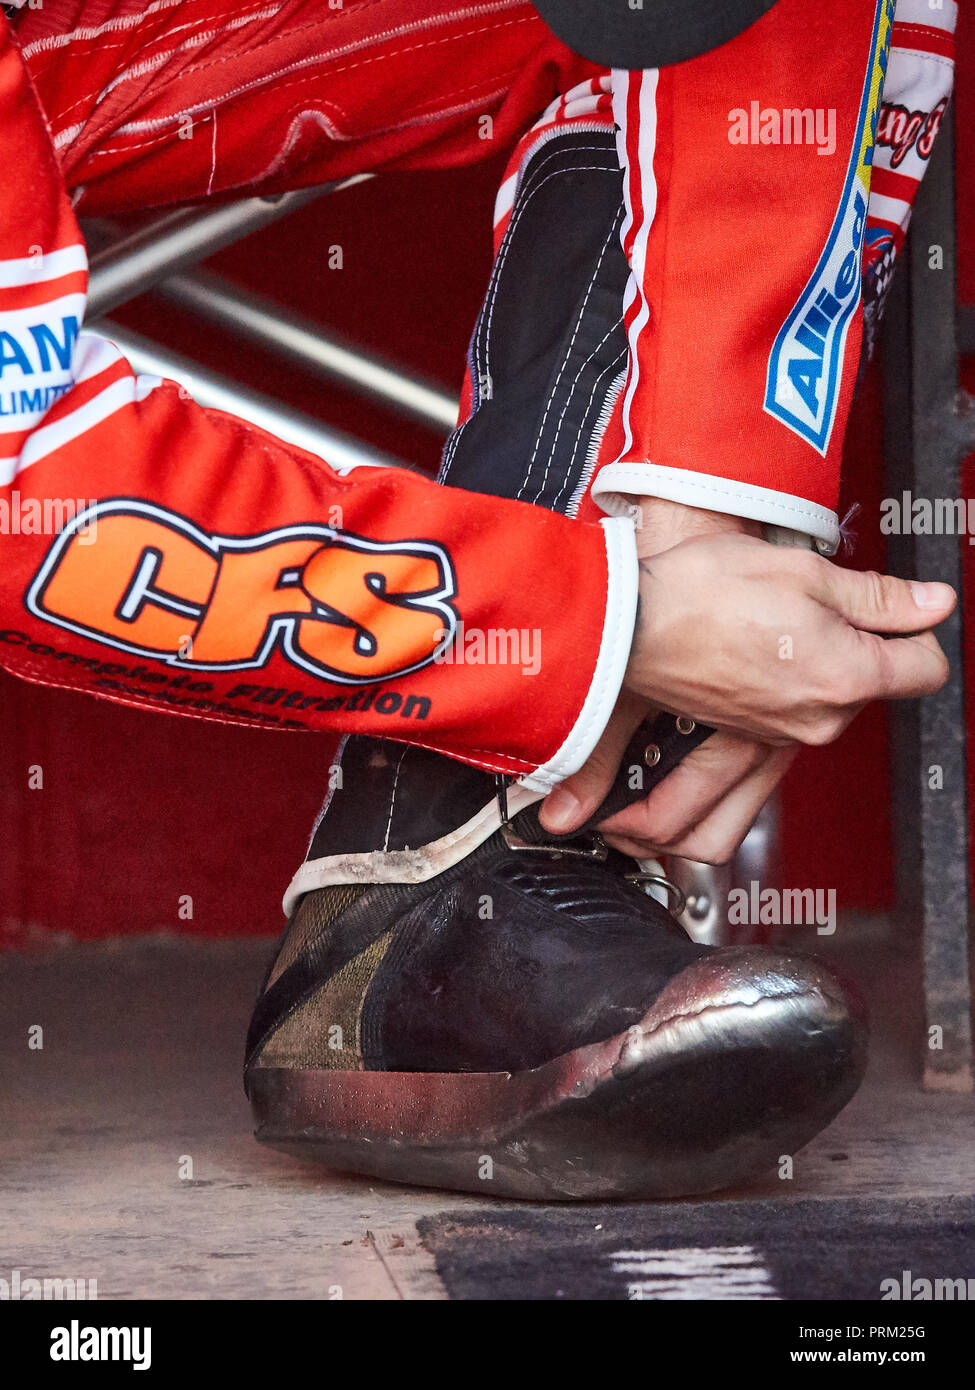 Glasgow Tigers speedway rider prepares for his turn during the match against Newcastle Diamonds Stock Photo